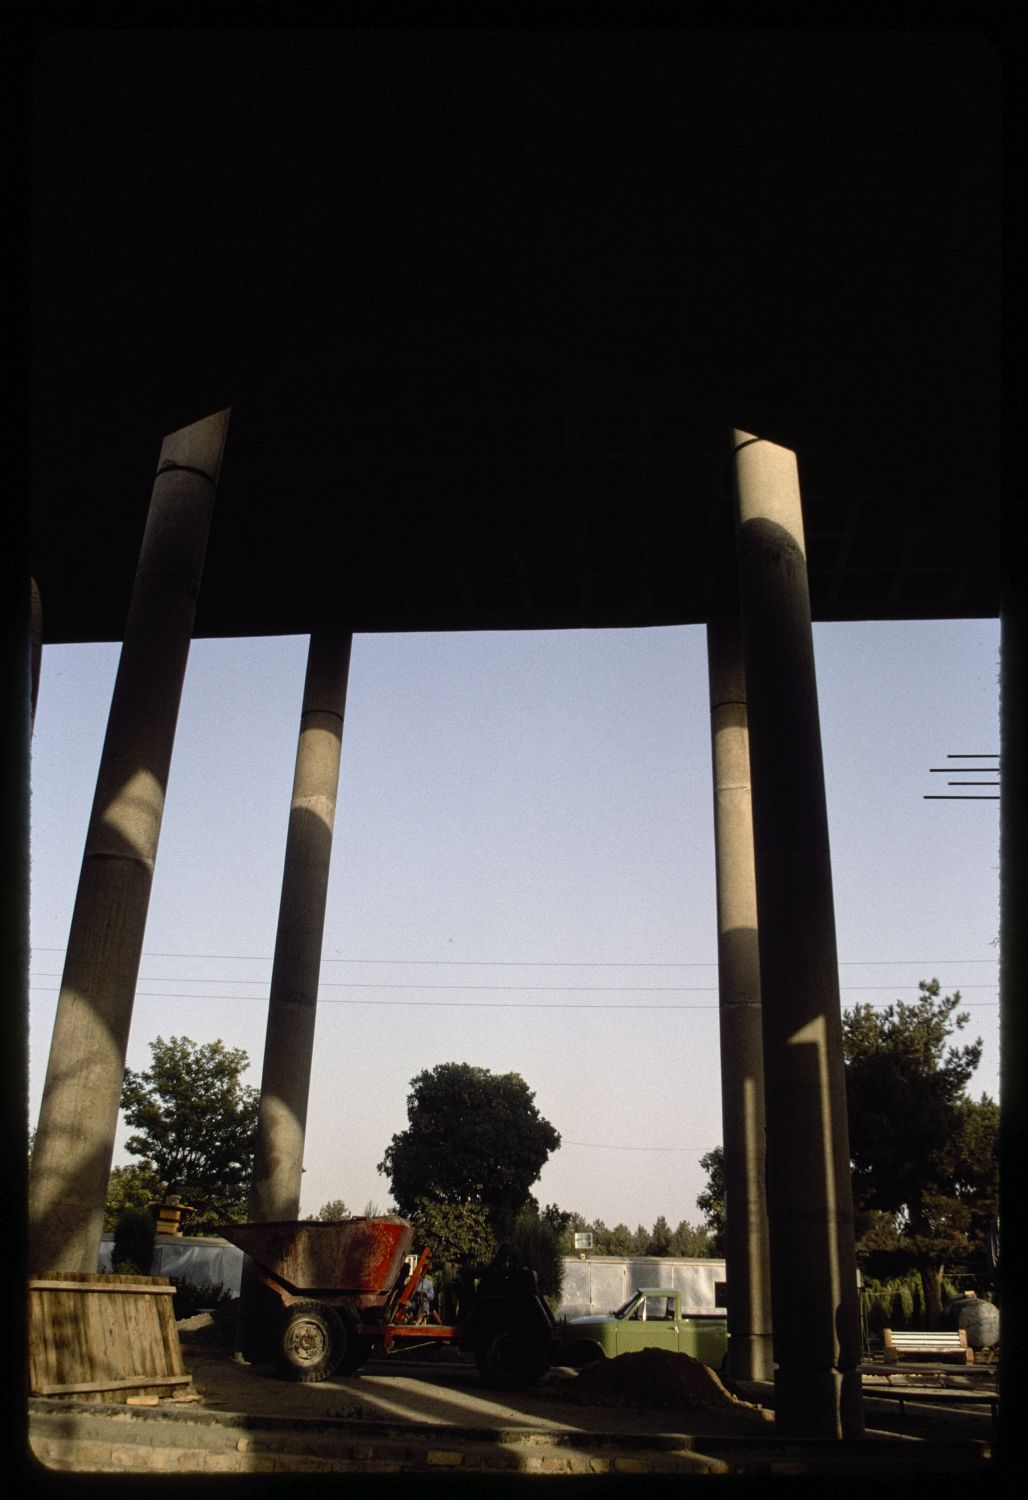 View of columns supporting roof under construction.